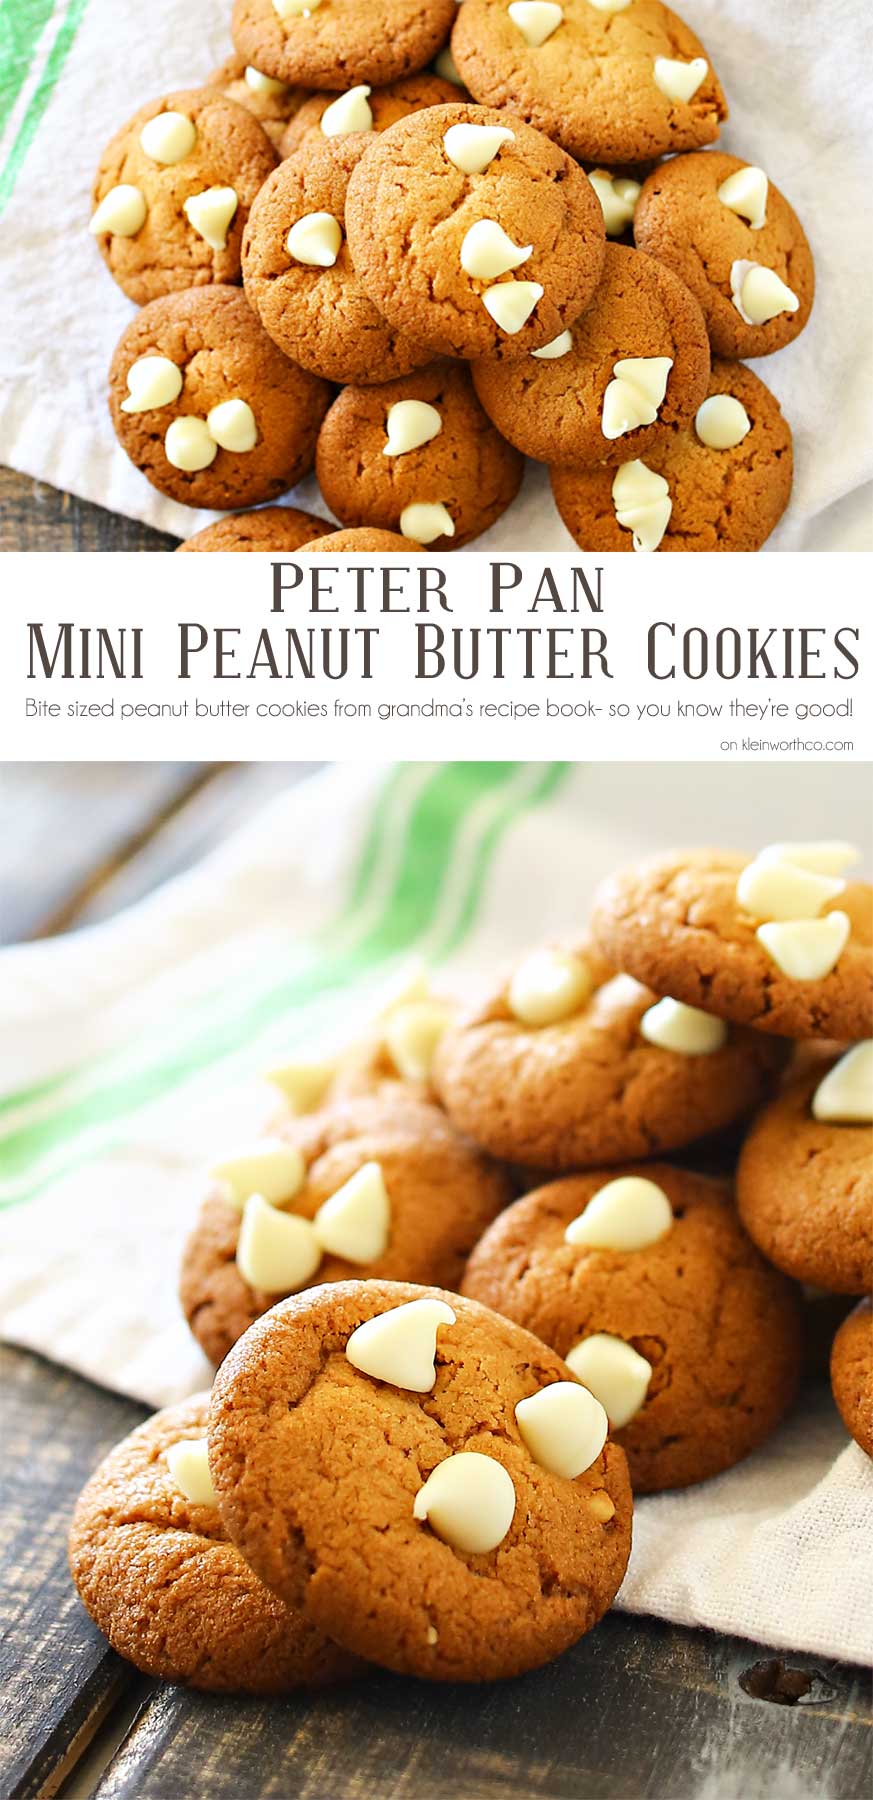 Peter Pan Peanut Butter Cookies are mini, soft & chewy peanut butter cookies with white chocolate chips. Perfect for the peanut butter lover in your life!!